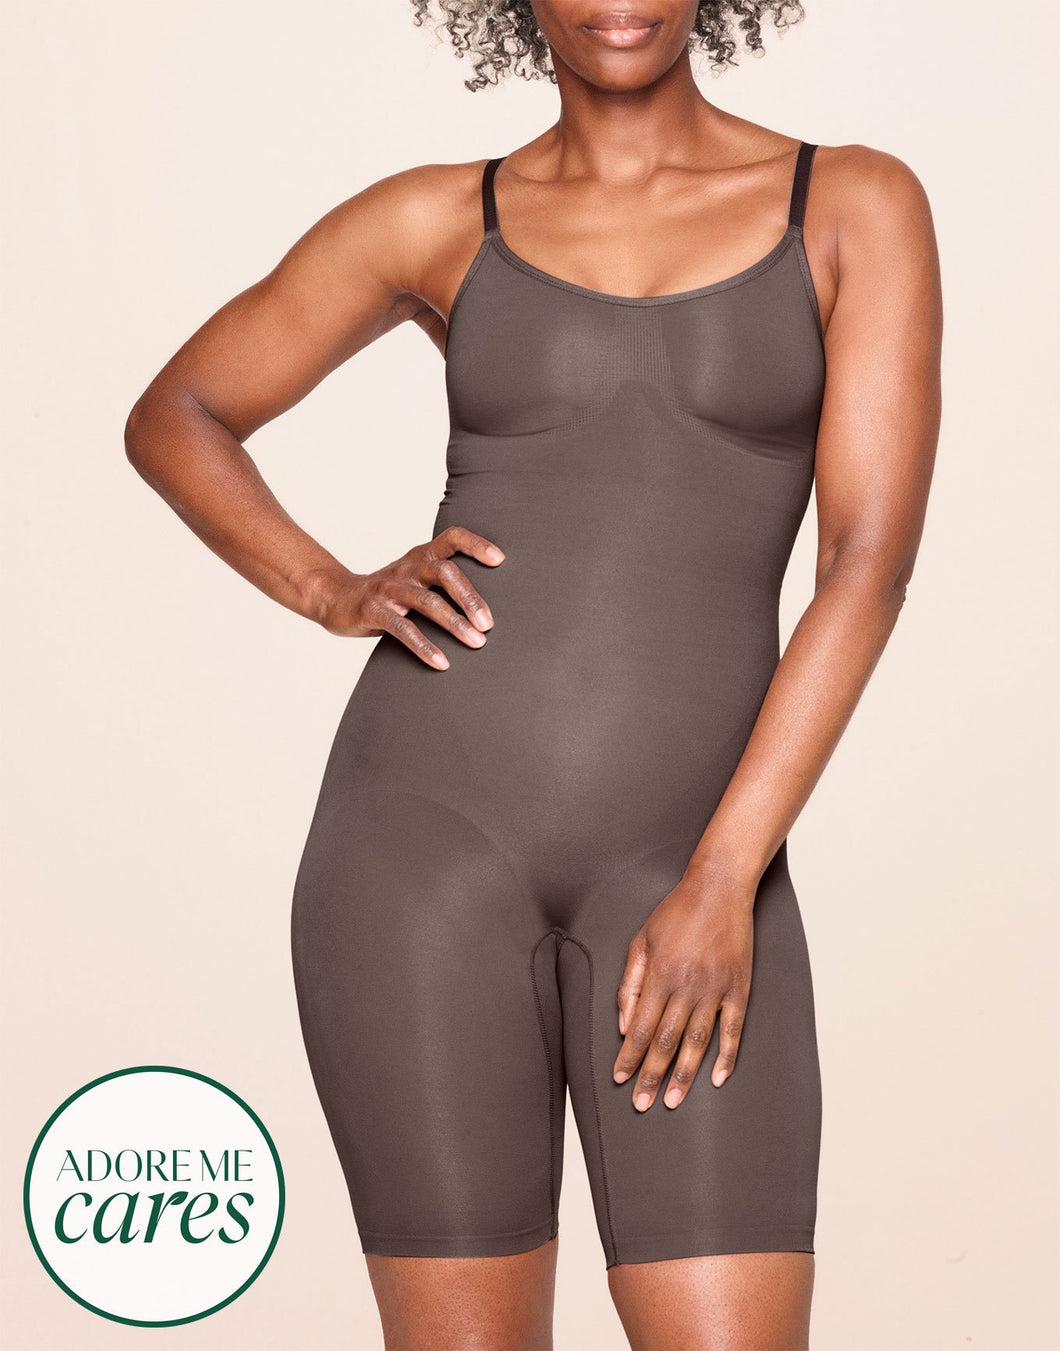 nueskin Analise in color Deep Taupe and shape bodysuit